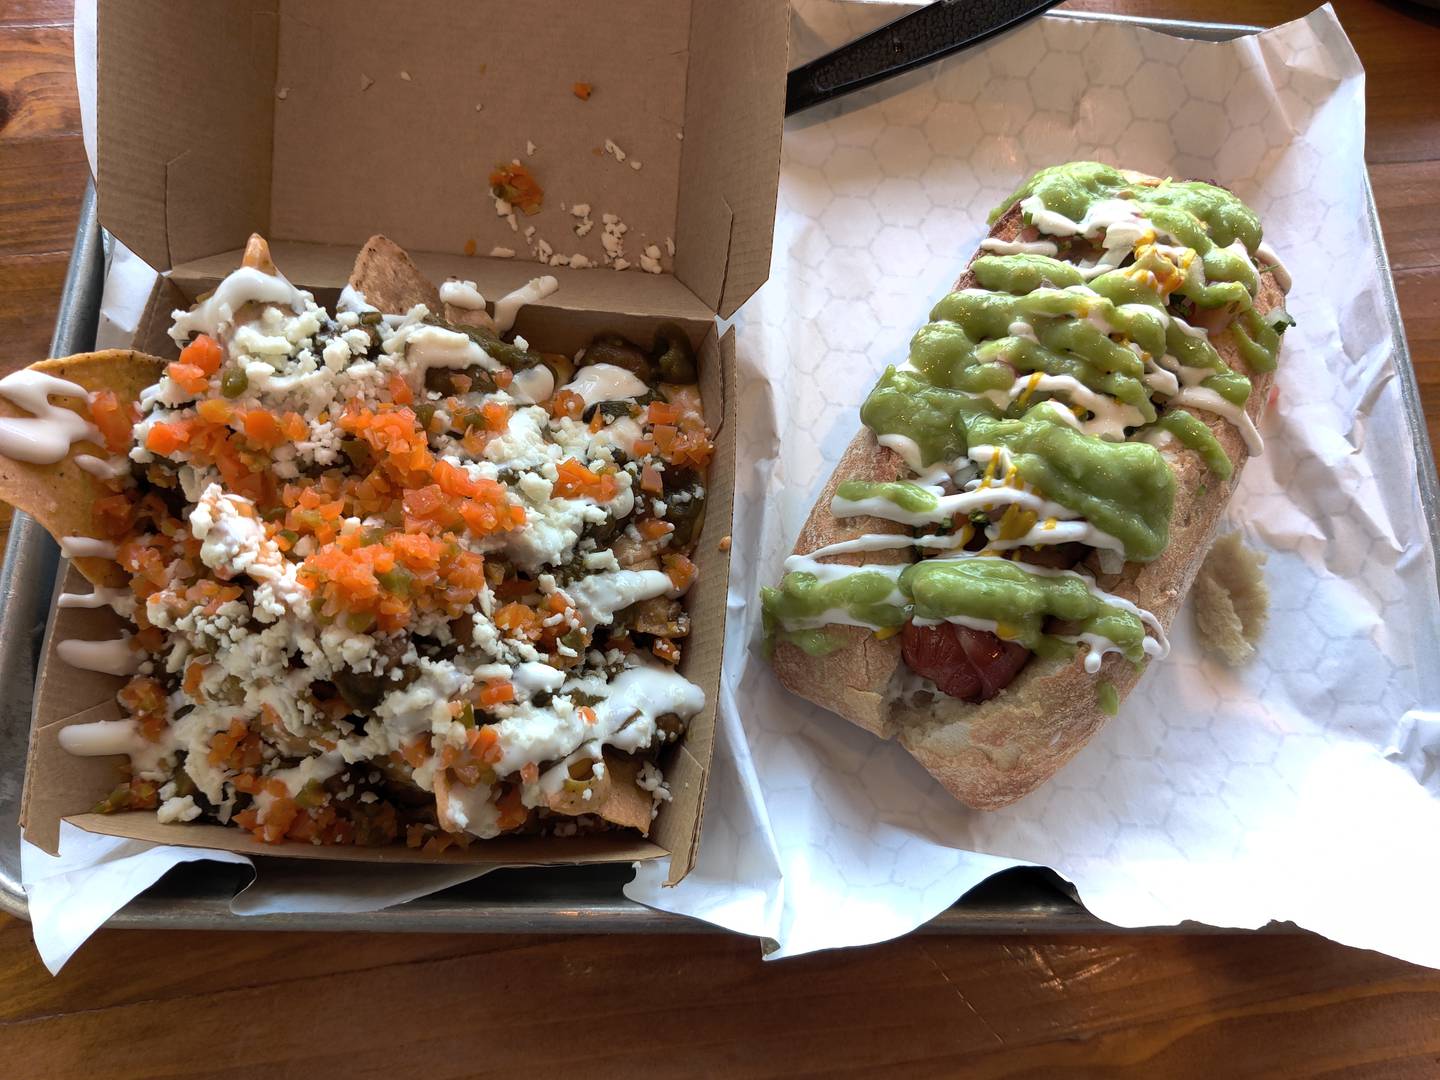 A side order of the house nachos is served with the Sonoran hot dog at the newly opened Nacho Burger, next door to its sister establishment, Bien Trucha, in downtown Geneva.